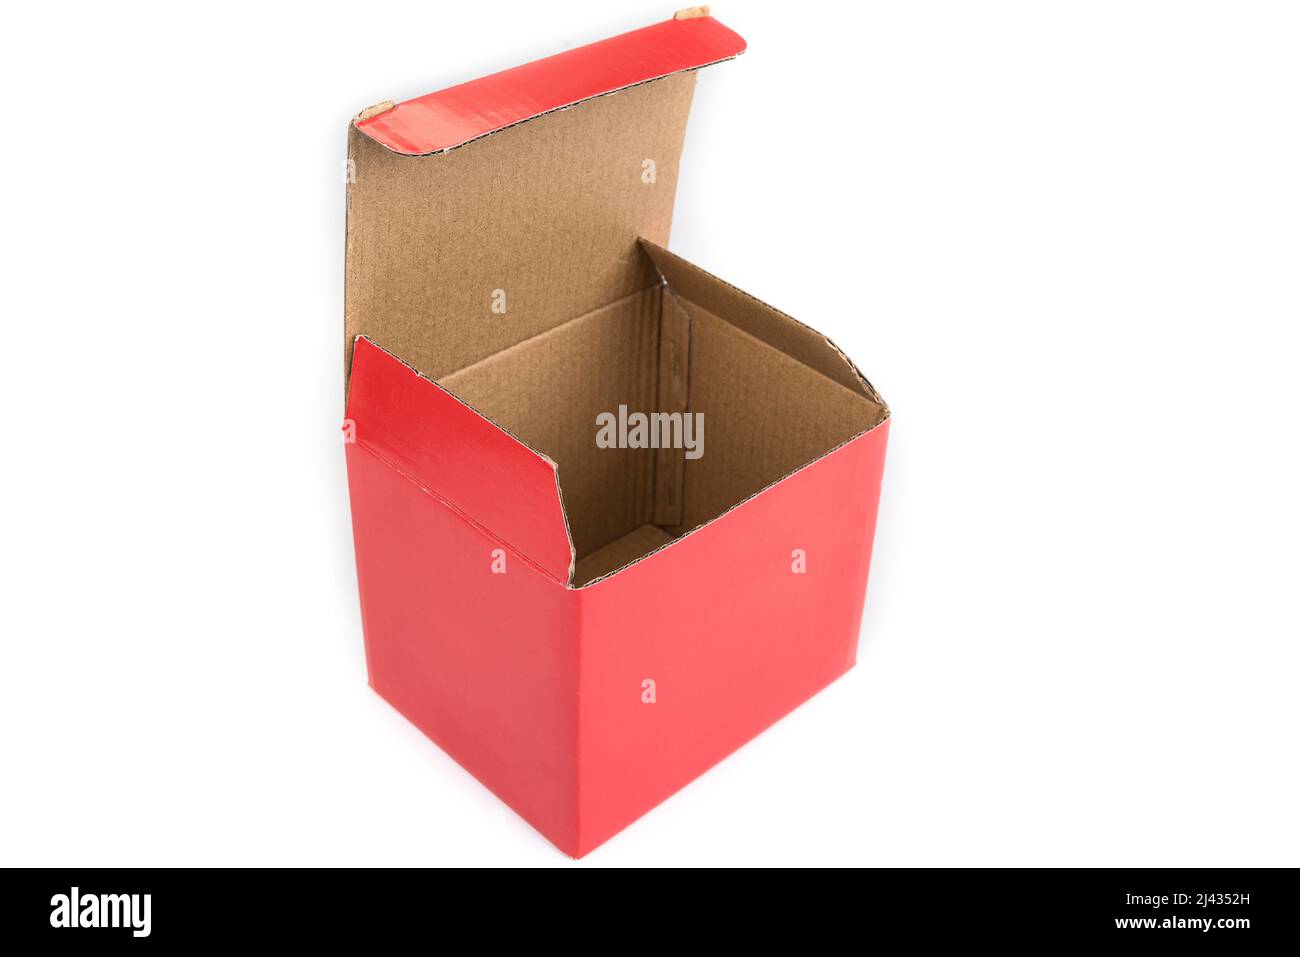 Empty red paper box on a black background Stock Photo